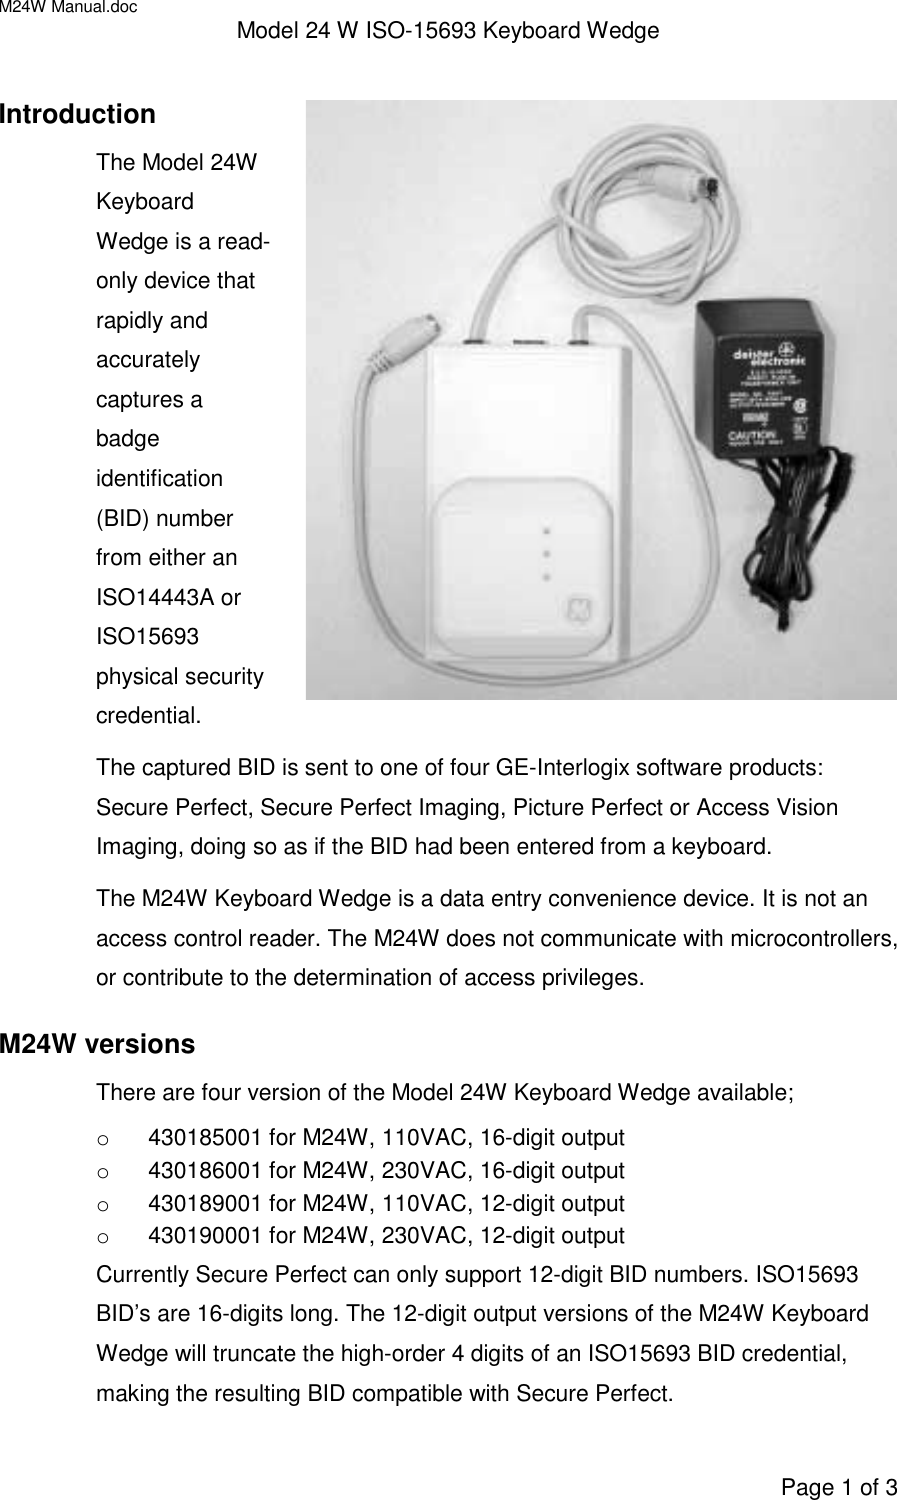 M24W Manual.doc Model 24 W ISO-15693 Keyboard WedgePage 1 of 3IntroductionThe Model 24WKeyboardWedge is a read-only device thatrapidly andaccuratelycaptures abadgeidentification(BID) numberfrom either anISO14443A orISO15693physical securitycredential.The captured BID is sent to one of four GE-Interlogix software products:Secure Perfect, Secure Perfect Imaging, Picture Perfect or Access VisionImaging, doing so as if the BID had been entered from a keyboard.The M24W Keyboard Wedge is a data entry convenience device. It is not anaccess control reader. The M24W does not communicate with microcontrollers,or contribute to the determination of access privileges.M24W versionsThere are four version of the Model 24W Keyboard Wedge available;o  430185001 for M24W, 110VAC, 16-digit outputo  430186001 for M24W, 230VAC, 16-digit outputo  430189001 for M24W, 110VAC, 12-digit outputo  430190001 for M24W, 230VAC, 12-digit outputCurrently Secure Perfect can only support 12-digit BID numbers. ISO15693BID’s are 16-digits long. The 12-digit output versions of the M24W KeyboardWedge will truncate the high-order 4 digits of an ISO15693 BID credential,making the resulting BID compatible with Secure Perfect.